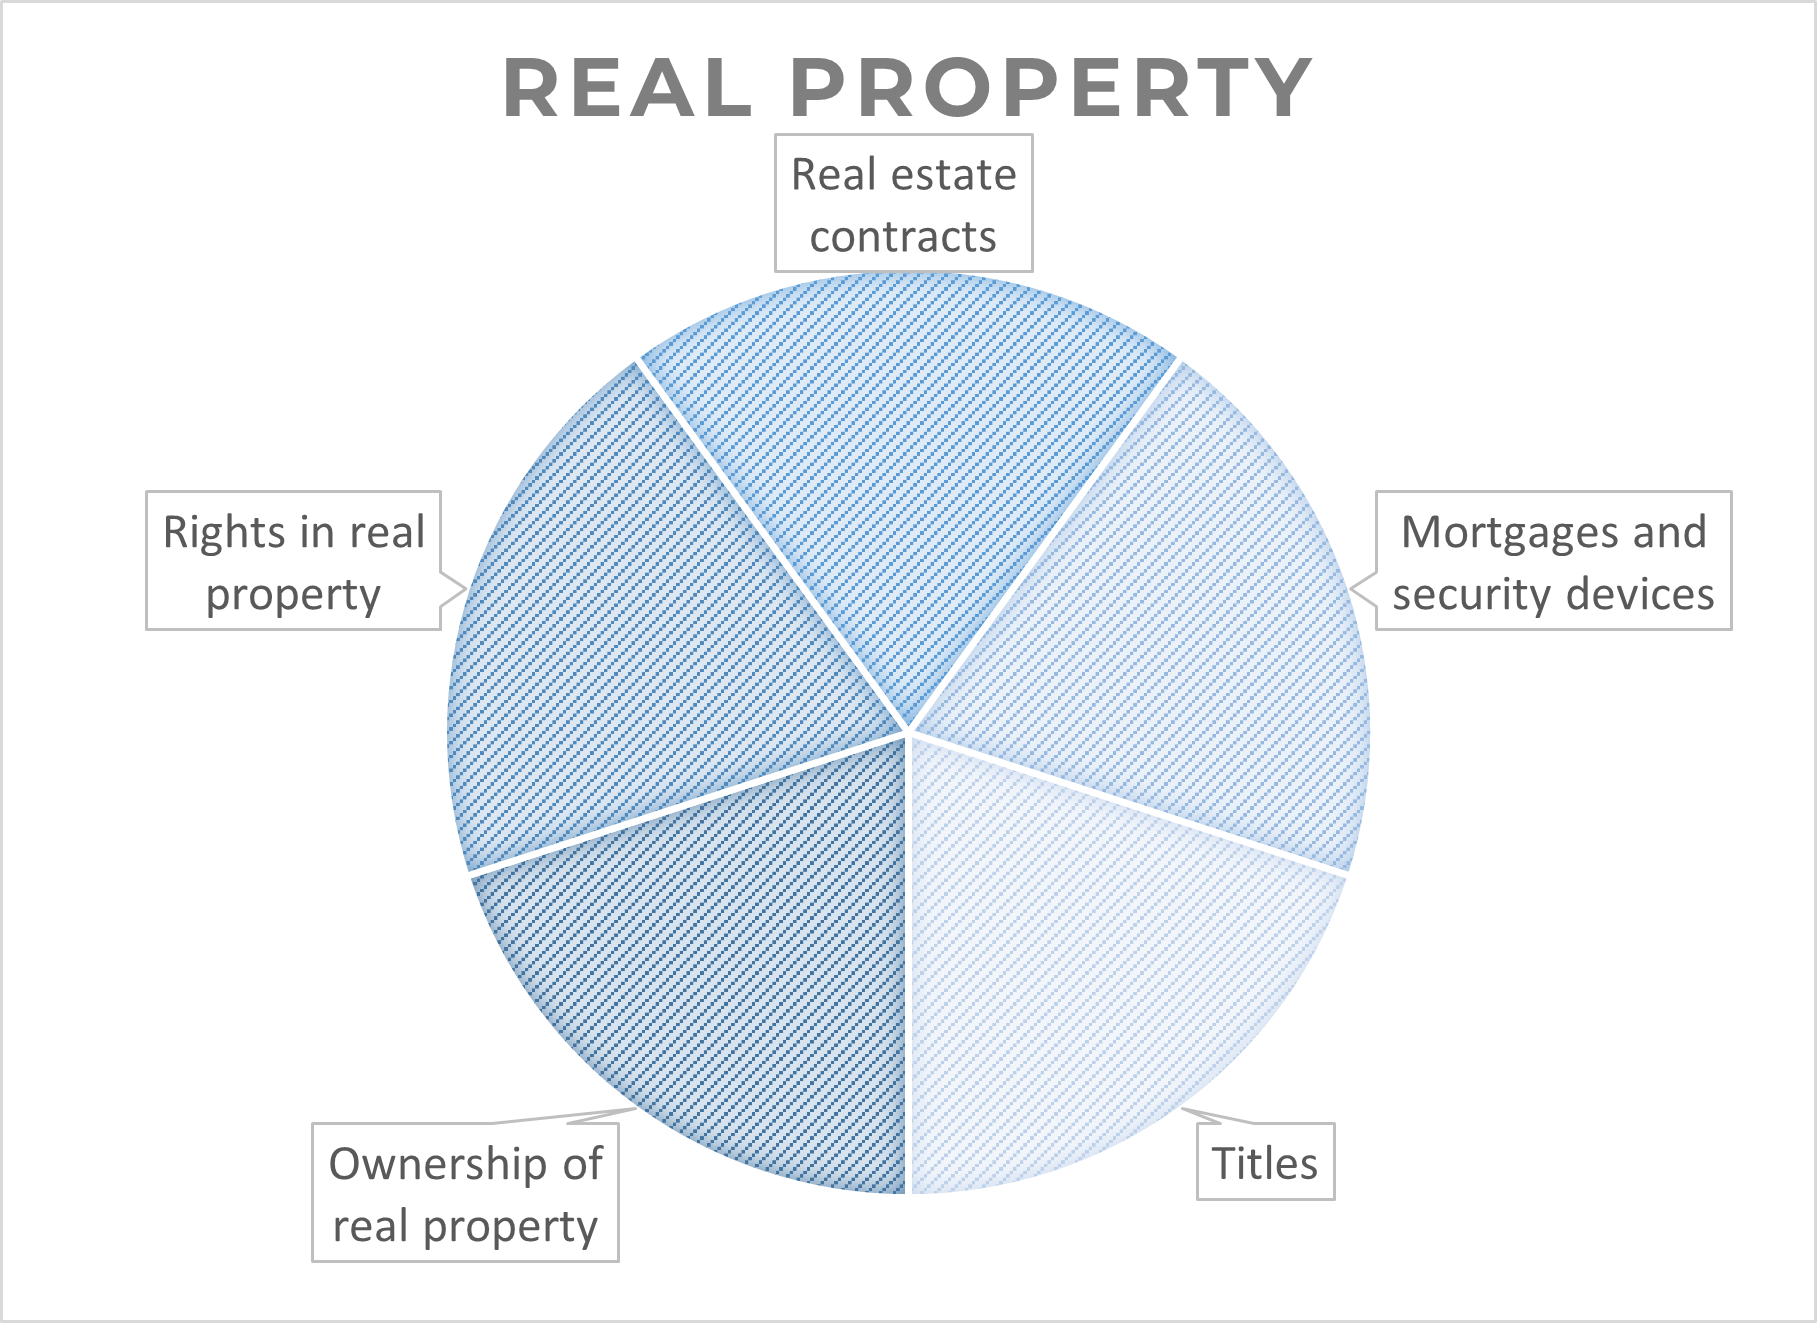 Highly tested topics in Real Property